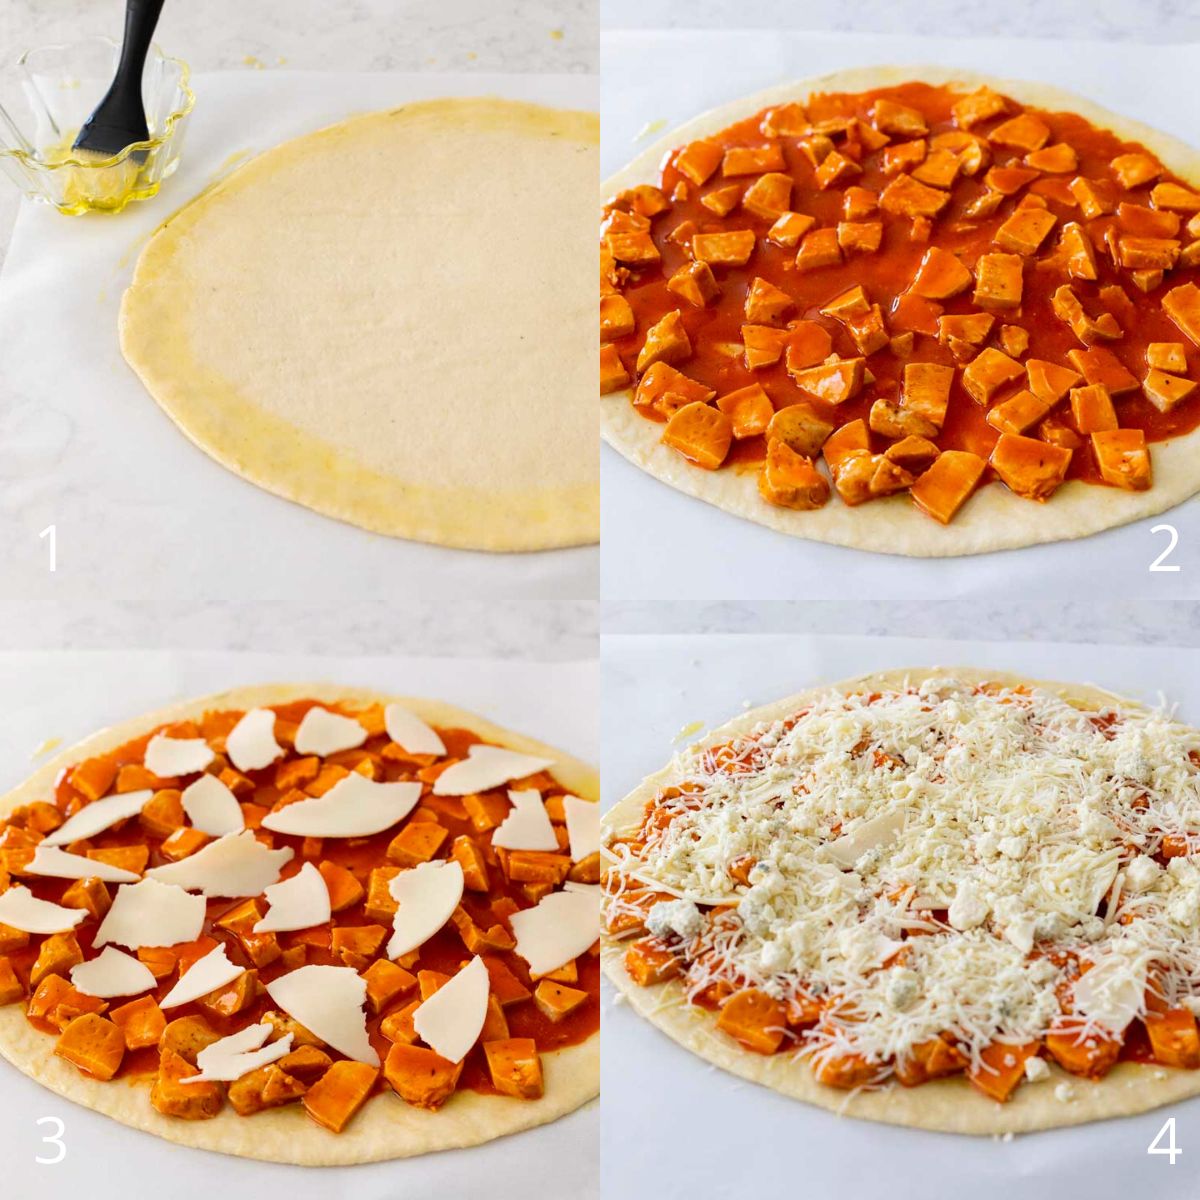 The step by step photos show how to add the toppings to the flatbread pizza.